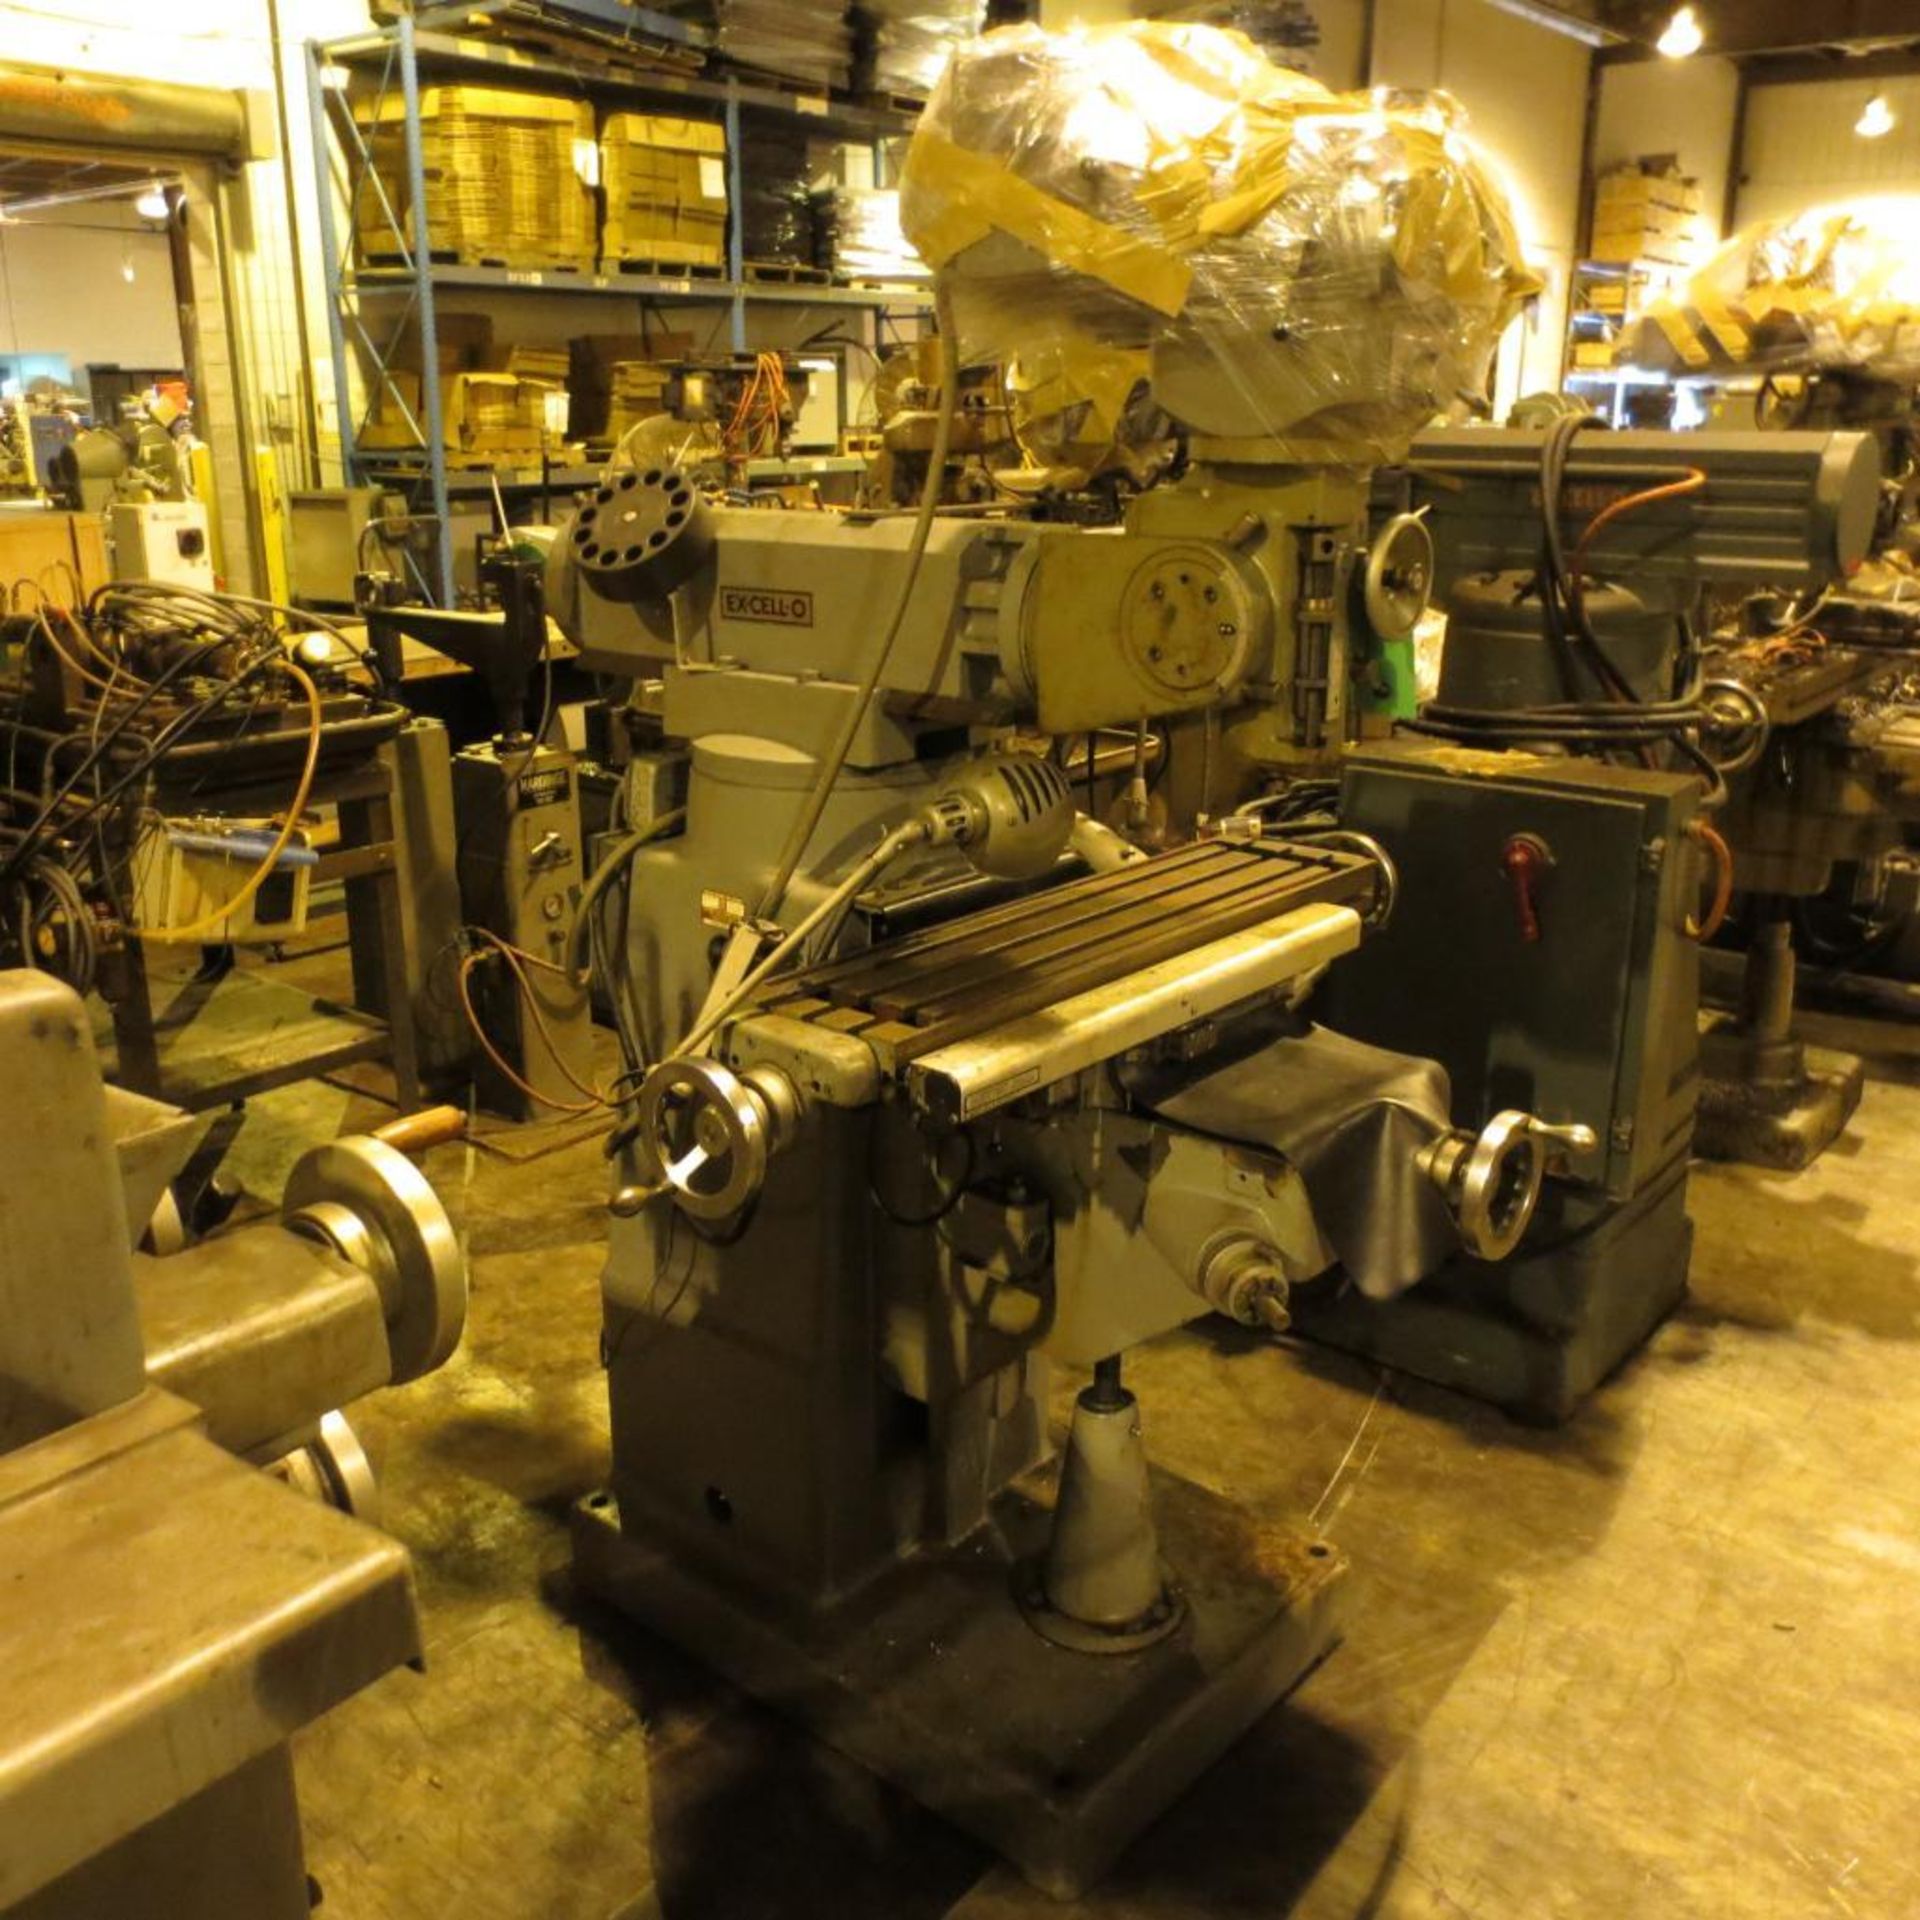 Excello Vertical Milling machine, 39"x9" Table with miniwizard XY Read Out *RIGGING $65*